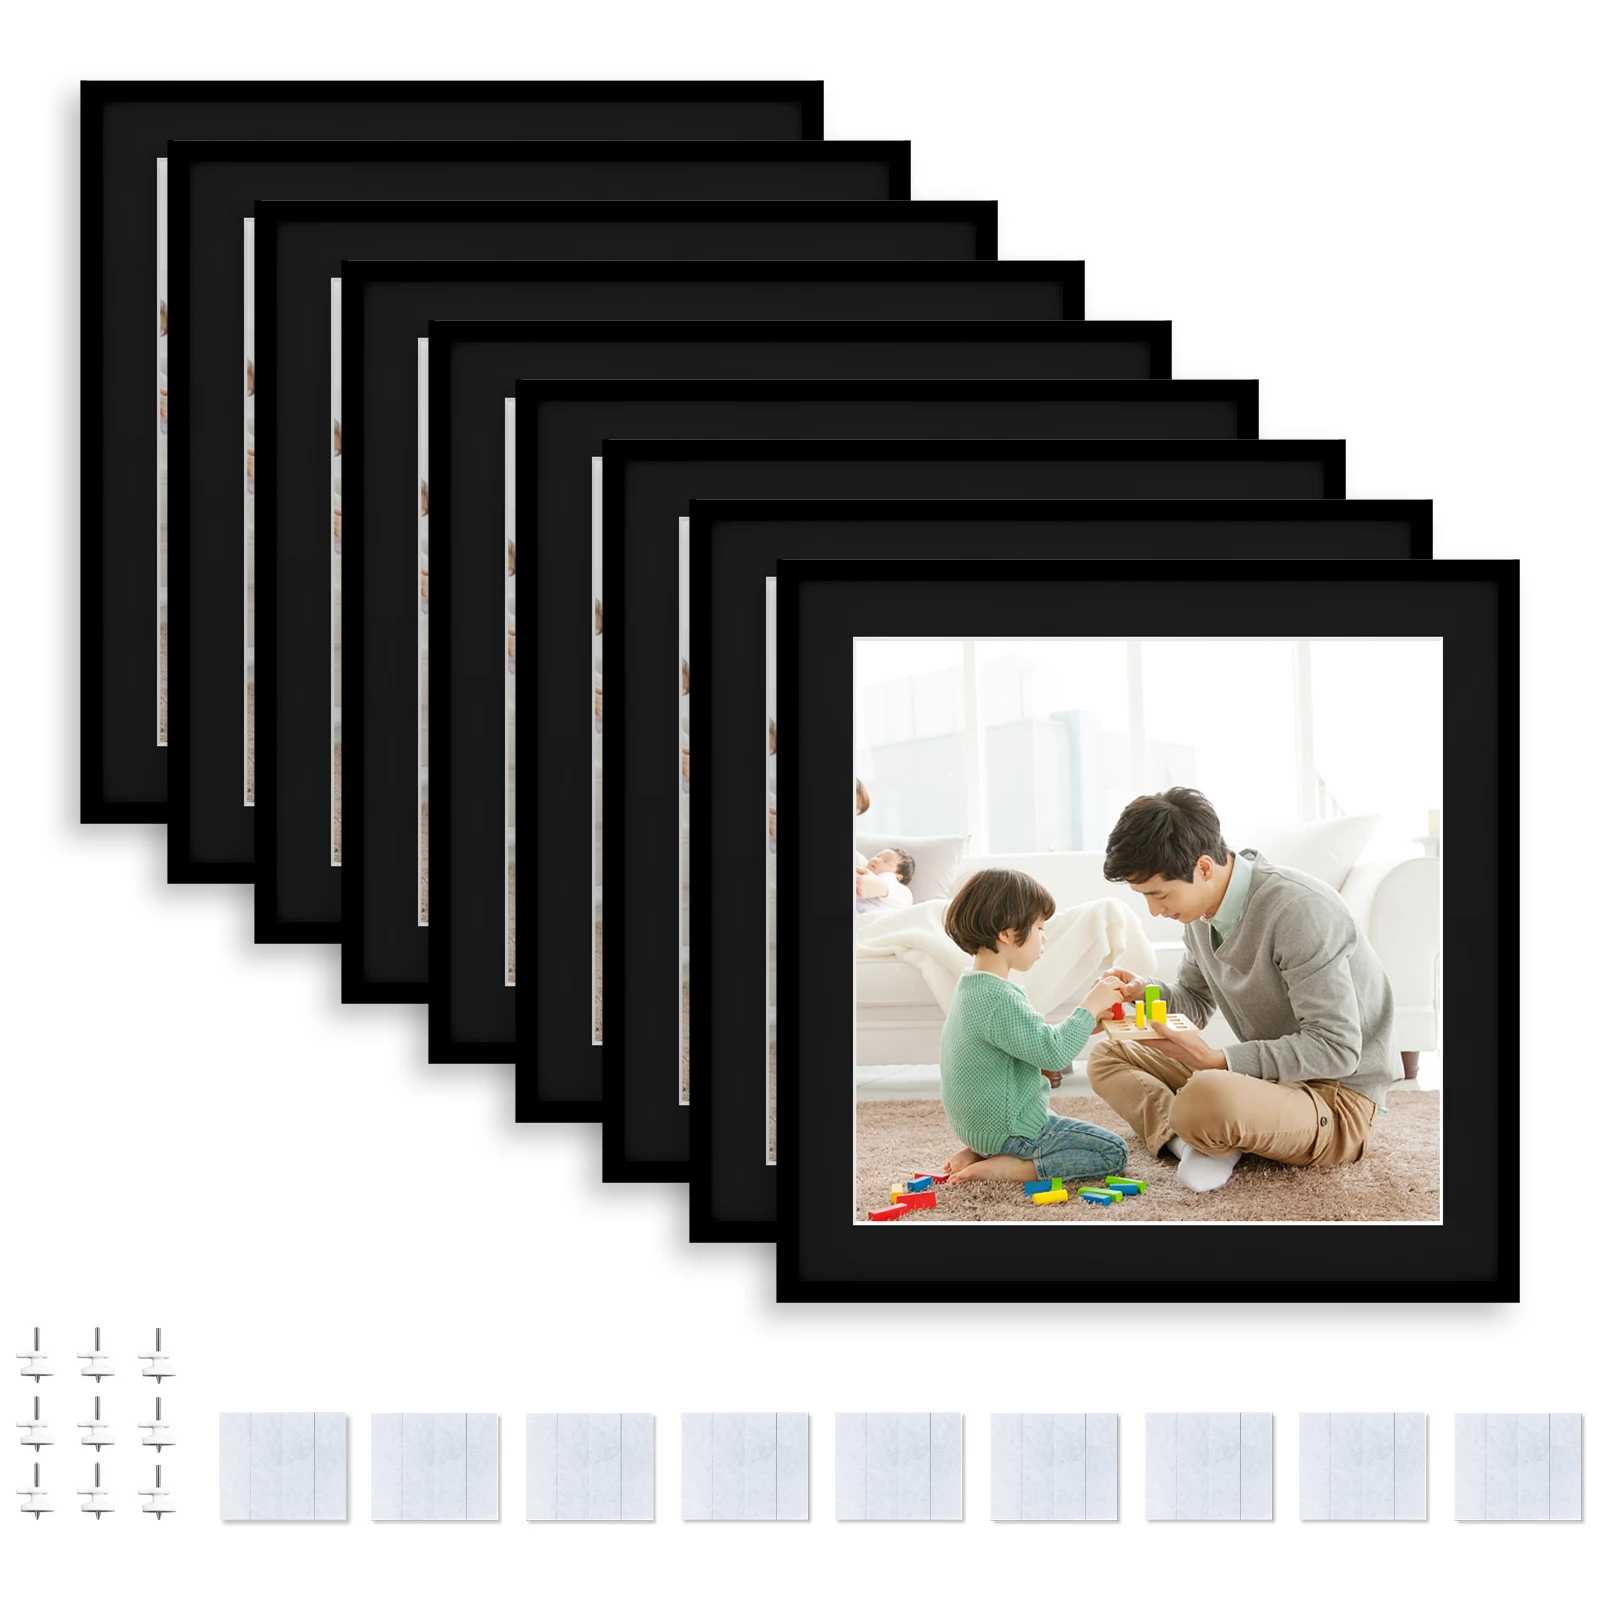 Happy Reunion 8x8 Picture Tiles | Mix Tiles Picture Frames Stick on Wall |  Photo Tiles Peel and Stick Picture Frames as Gallery Wall Frame Set (White